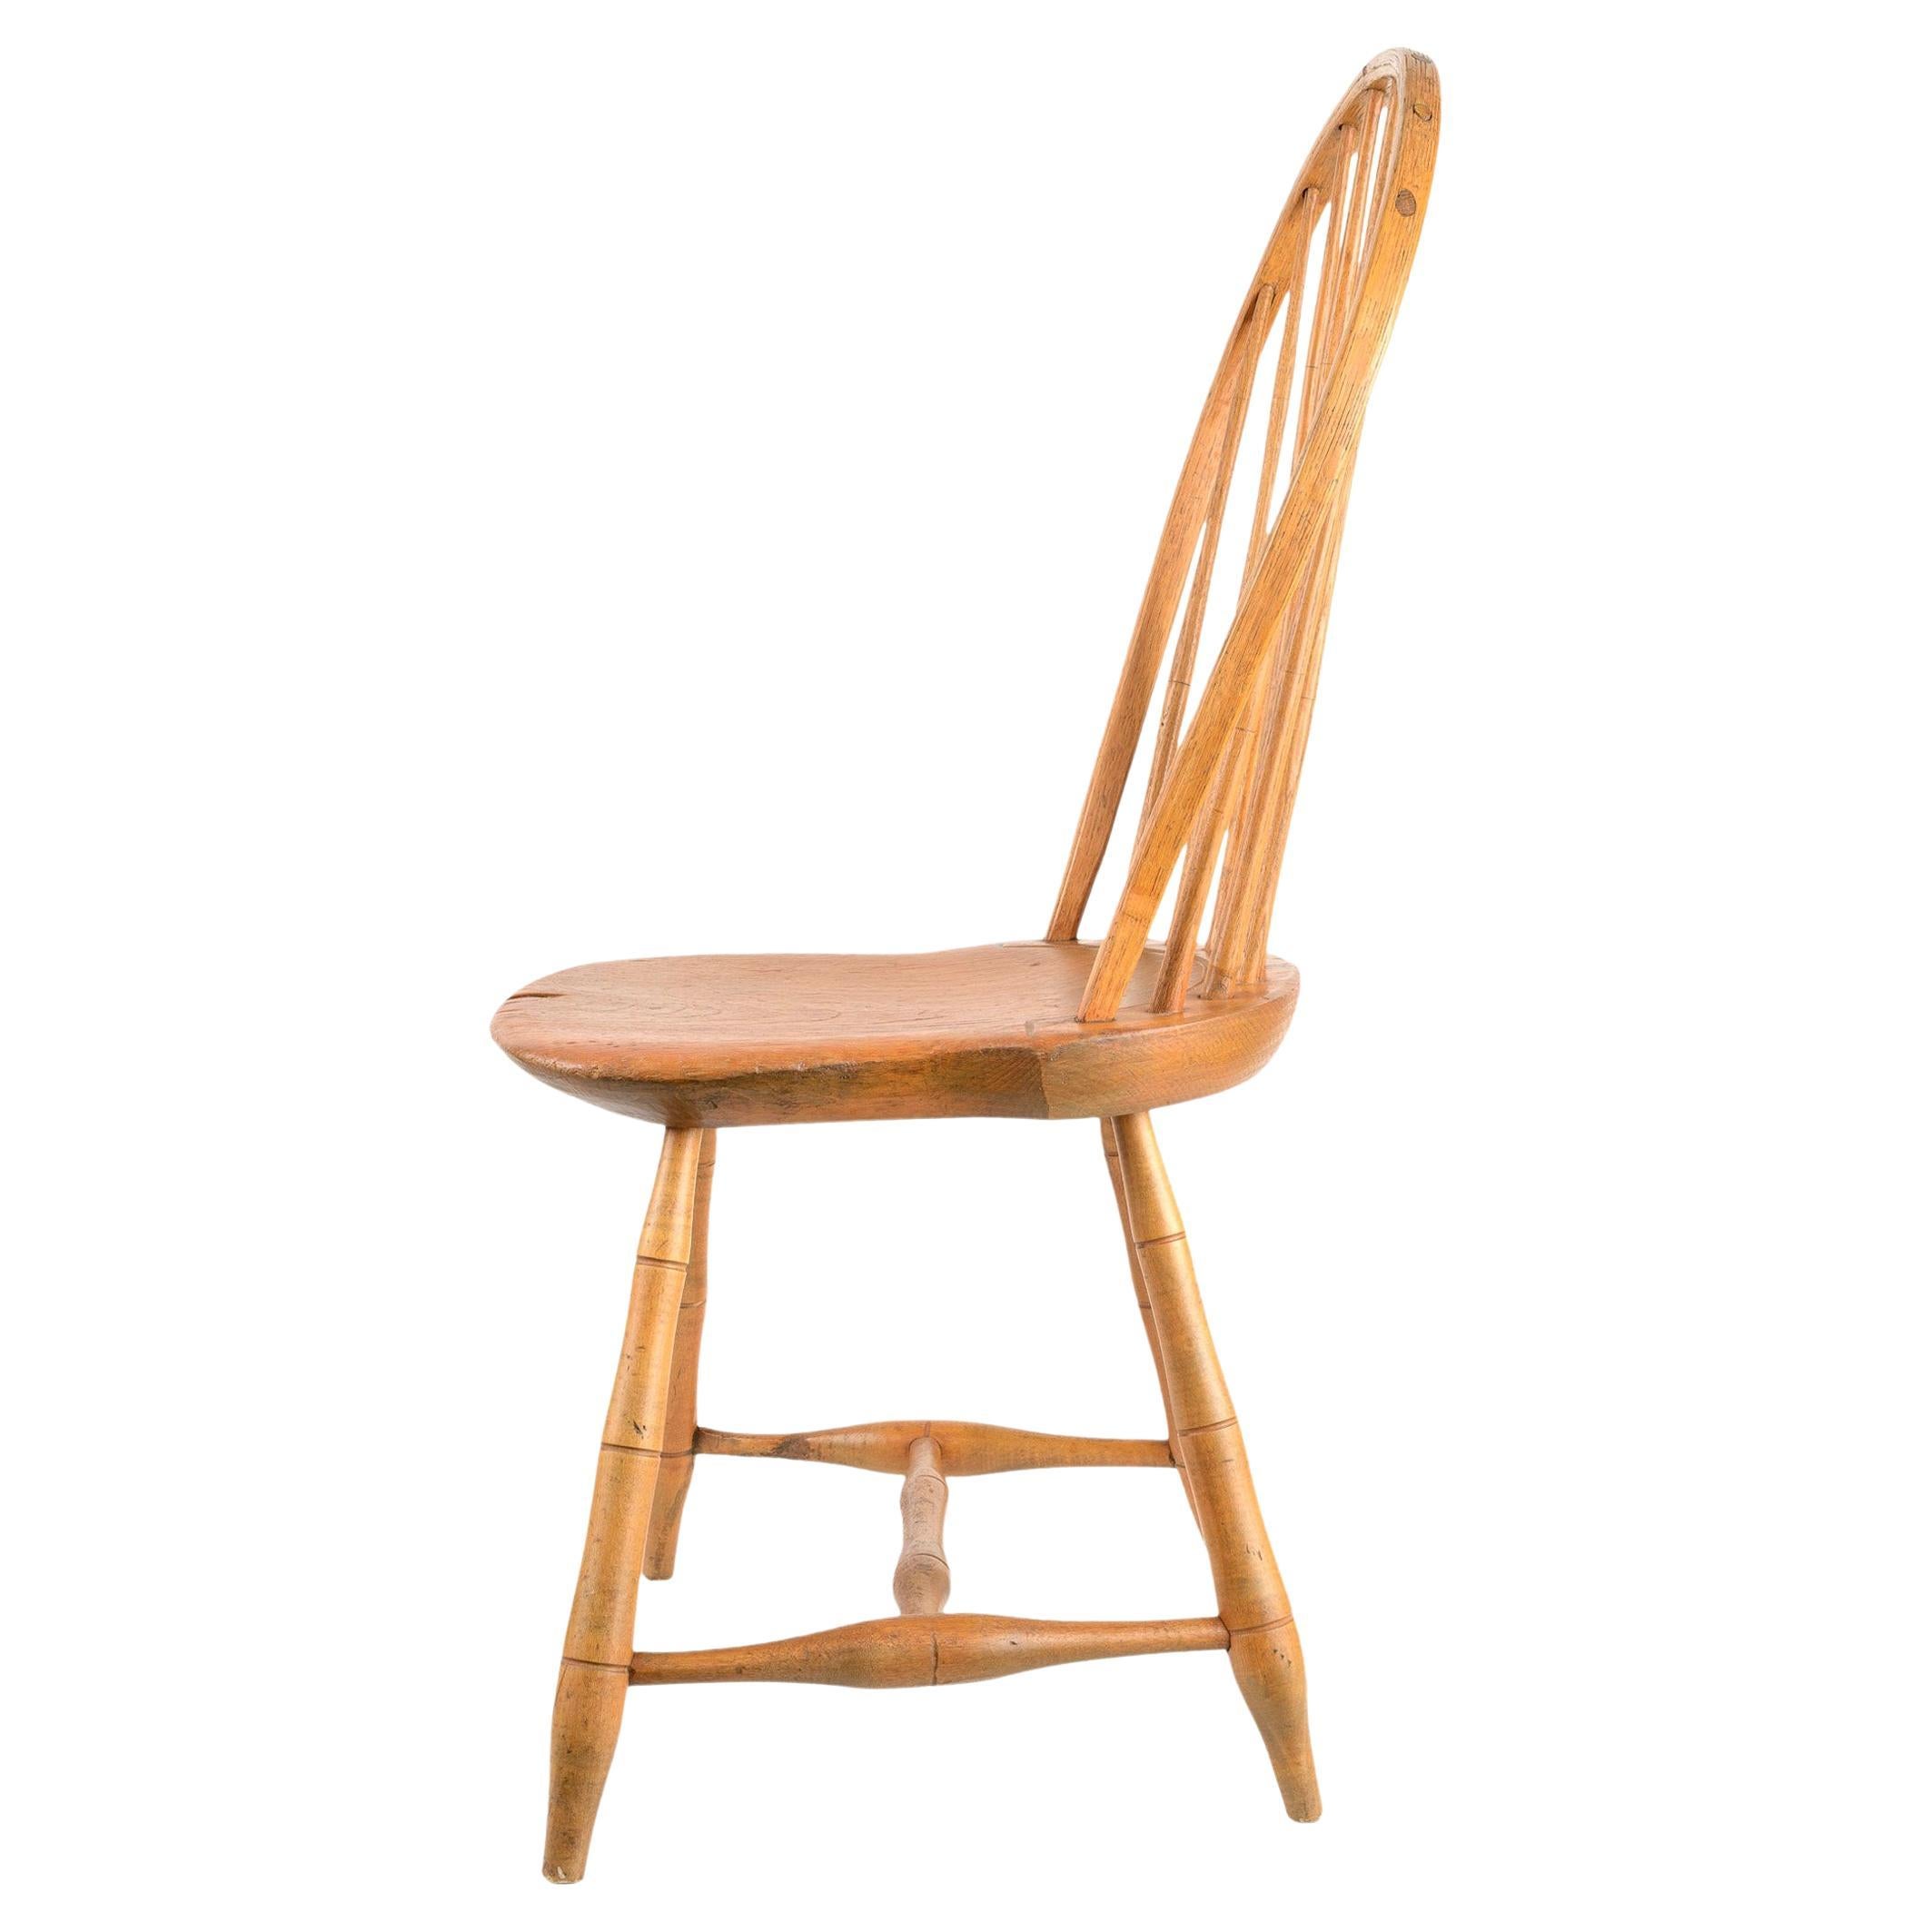 18th Century American Saddle Seat Bow Back Windsor Side Chair For Sale